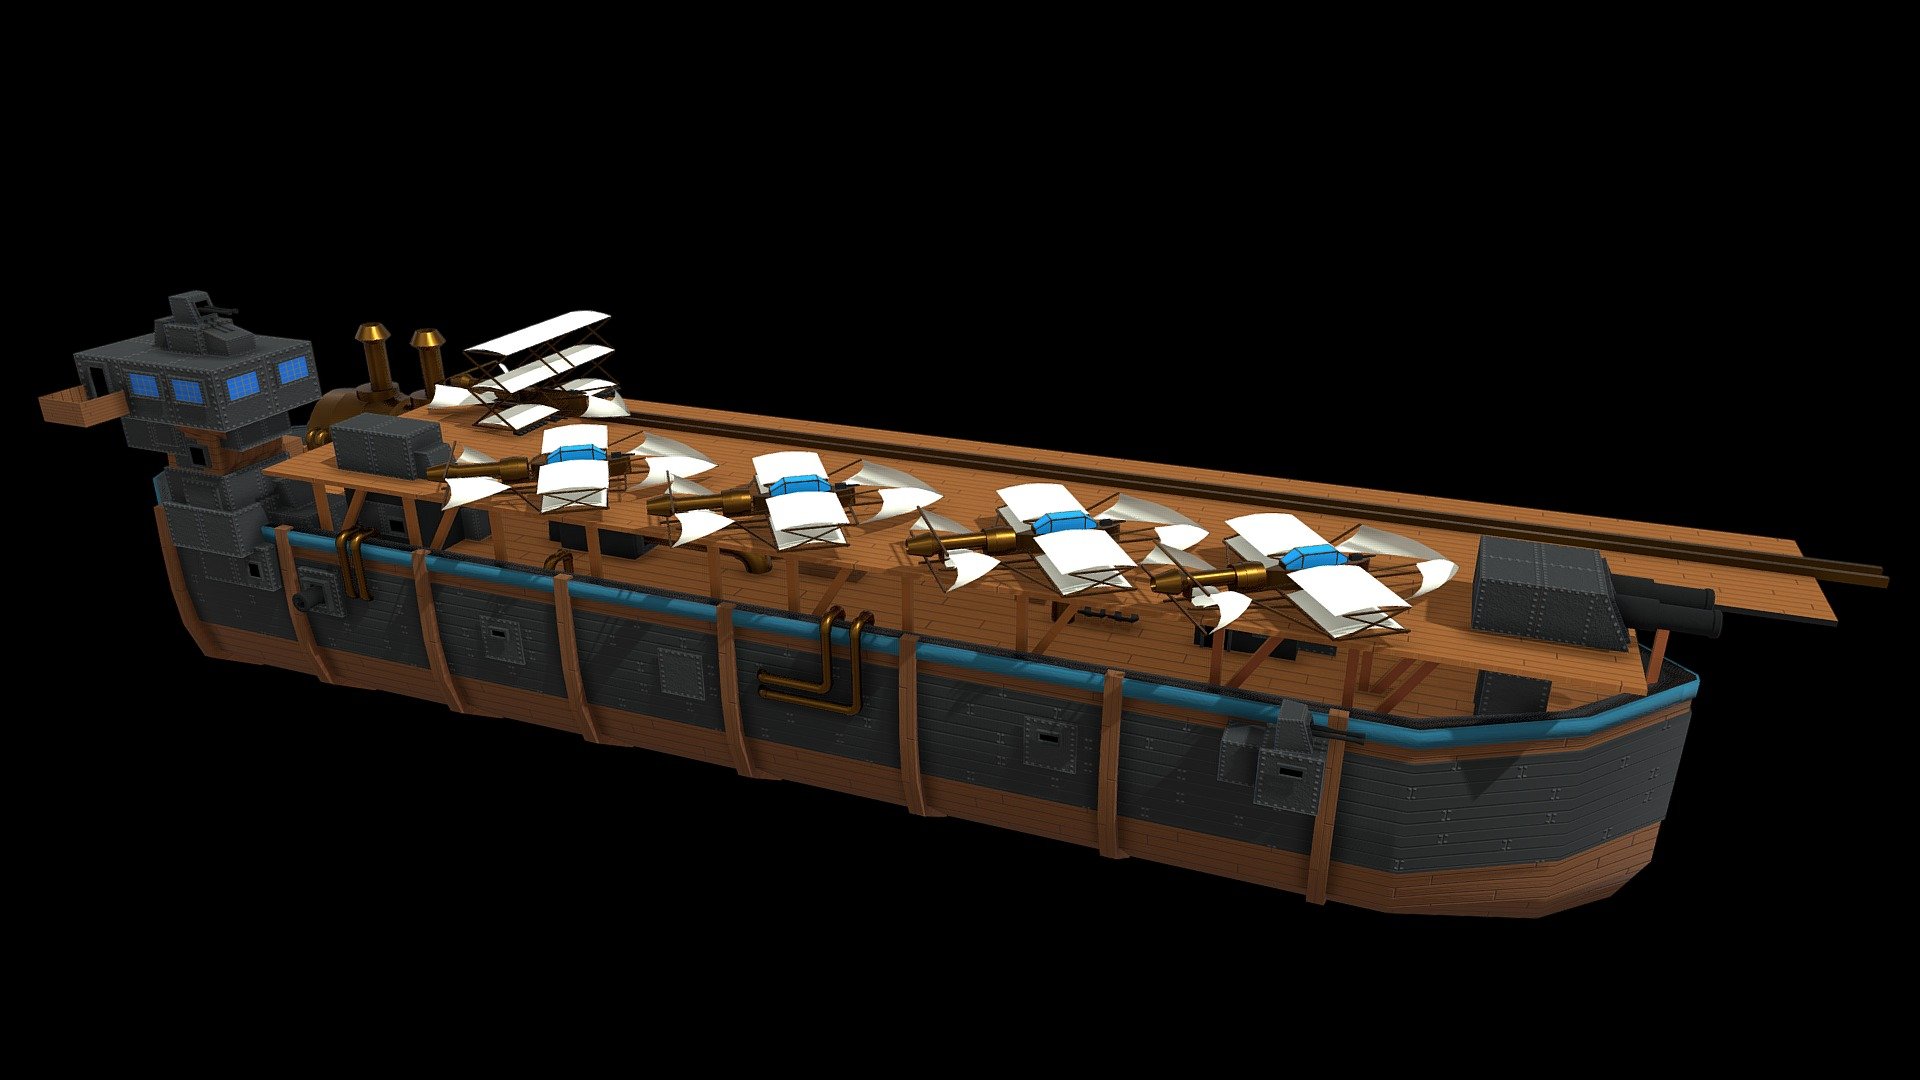 pre-1900s stylized glider carrier

-carrier ship with 4 attack gliders and one bomber glider 

-this is part of a collection of ships https://skfb.ly/oHOAO - War Ship Carrier - Buy Royalty Free 3D model by Randall_3D 3d model